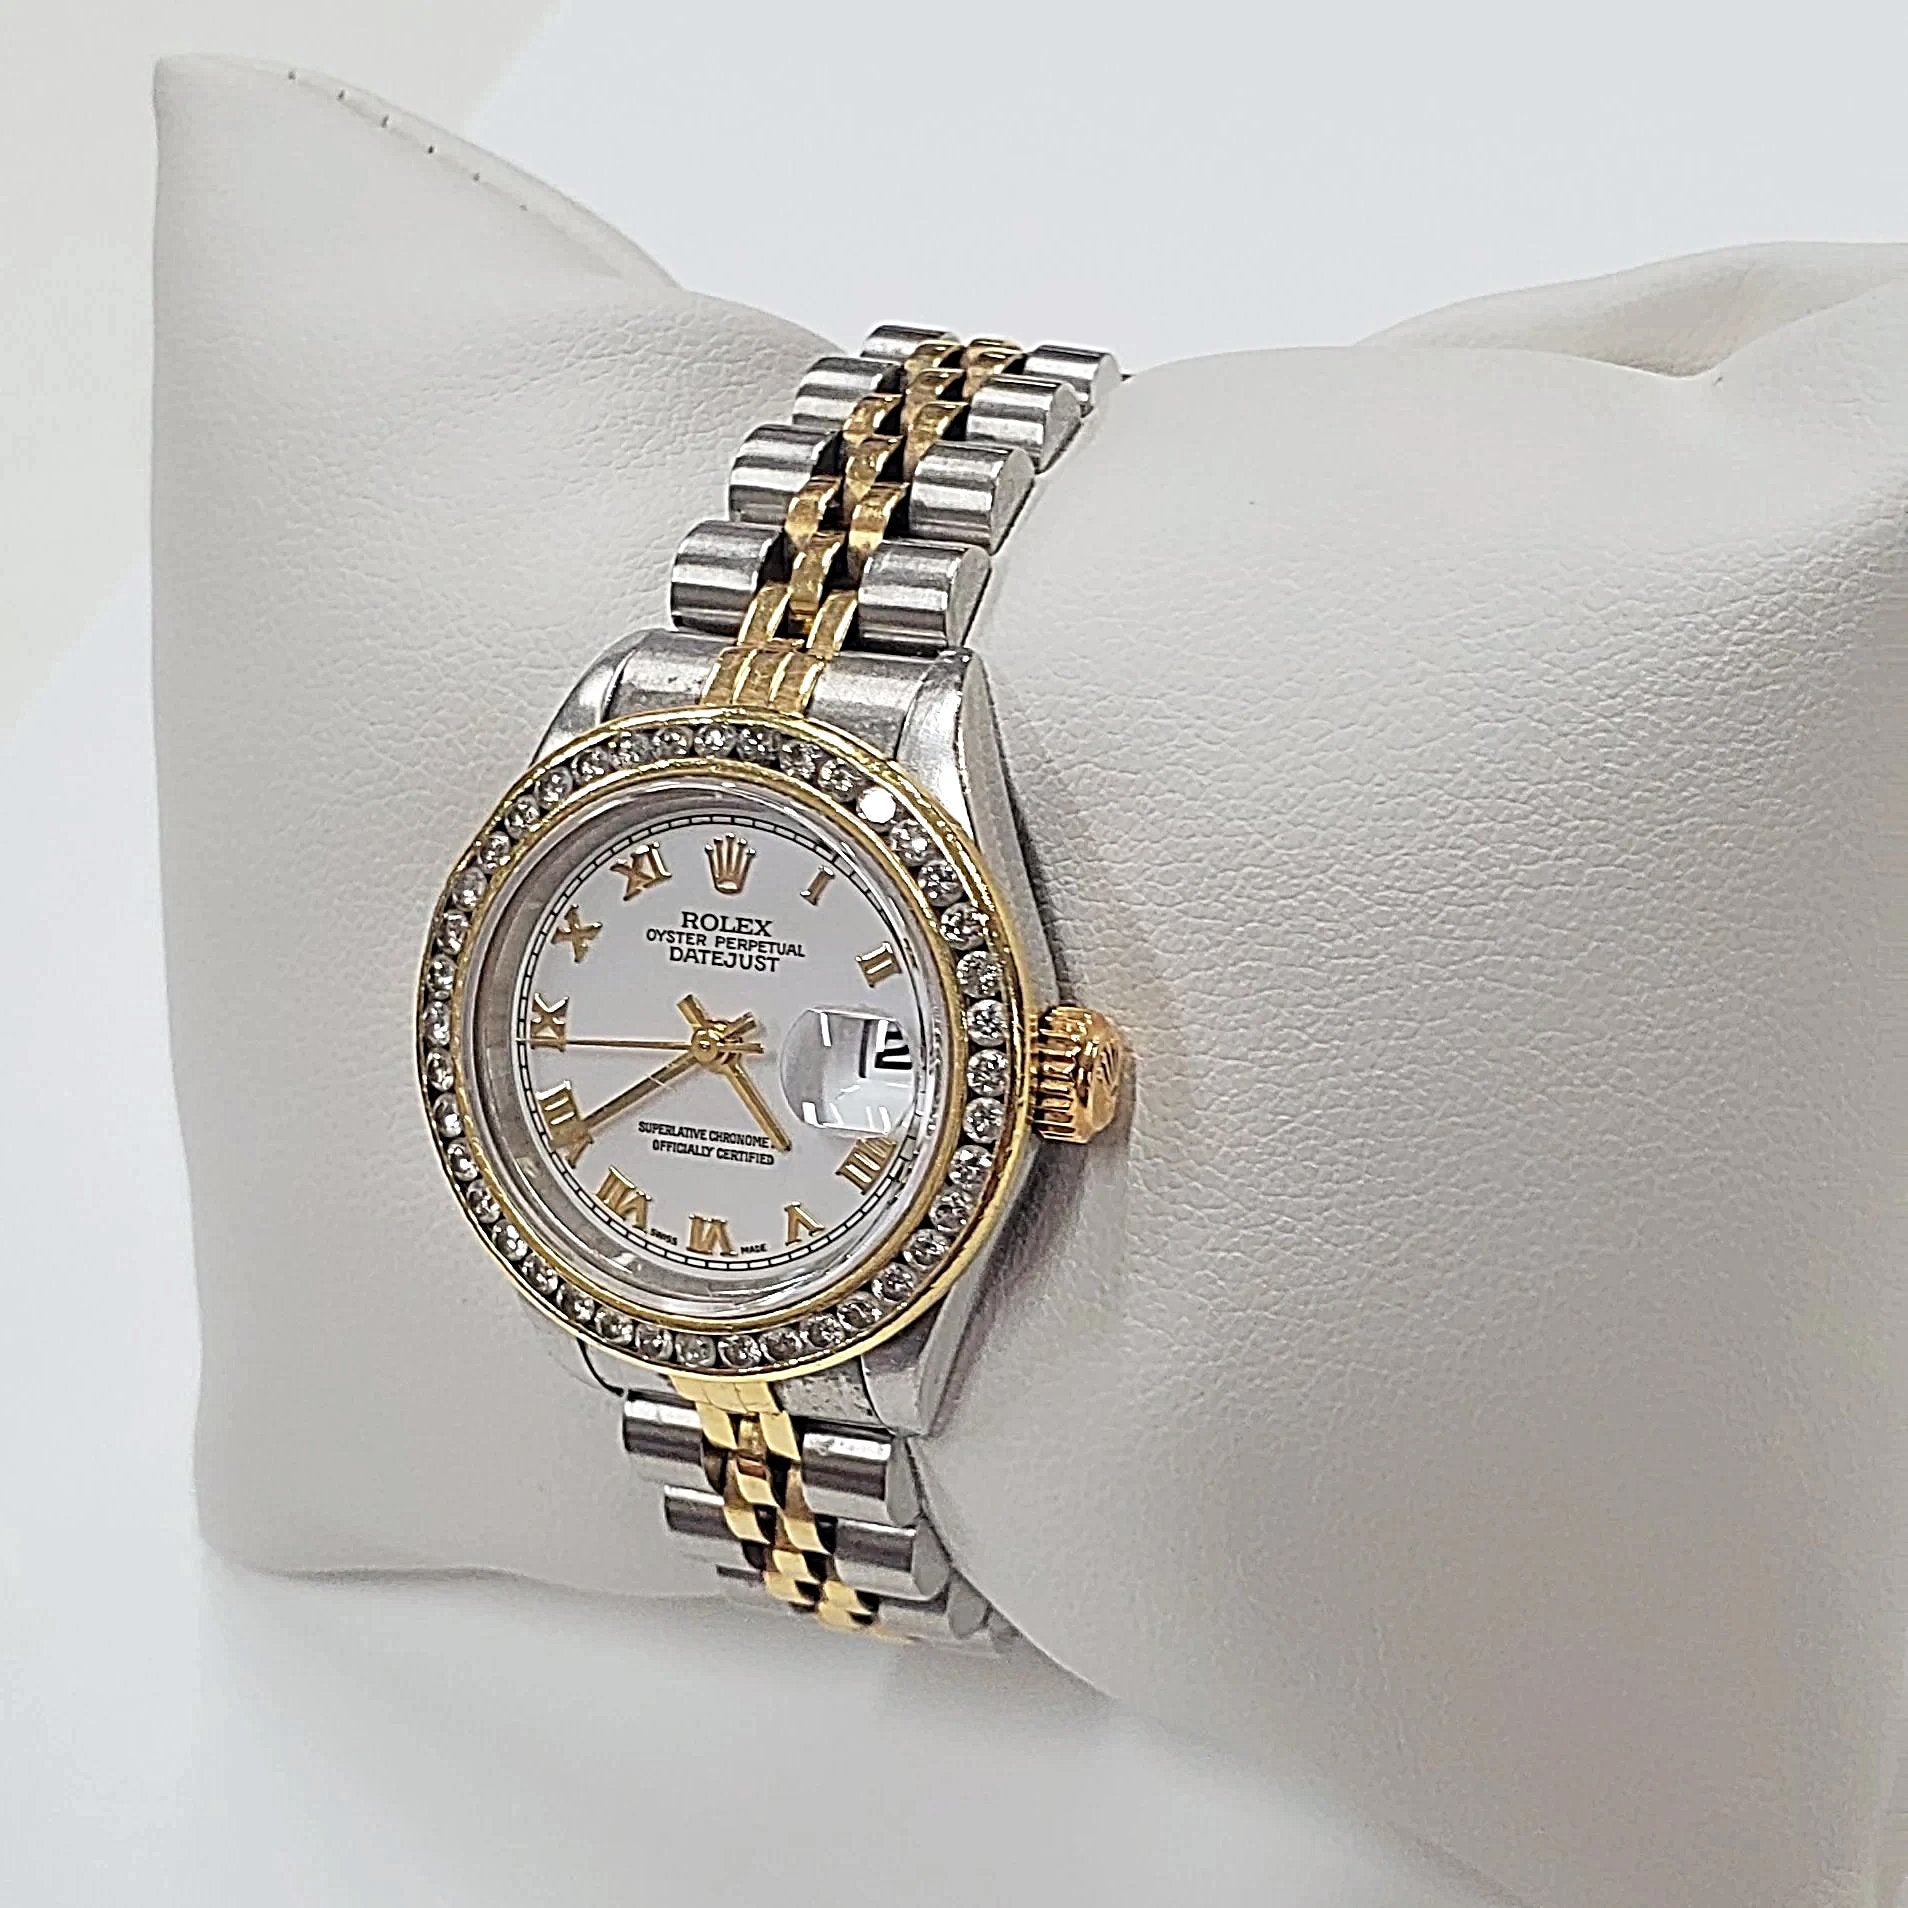 Women's Rolex 18K Gold Two-Tone 26mm DateJust Watch, with Diamond Bezel, White Dial, and Roman Numerals.